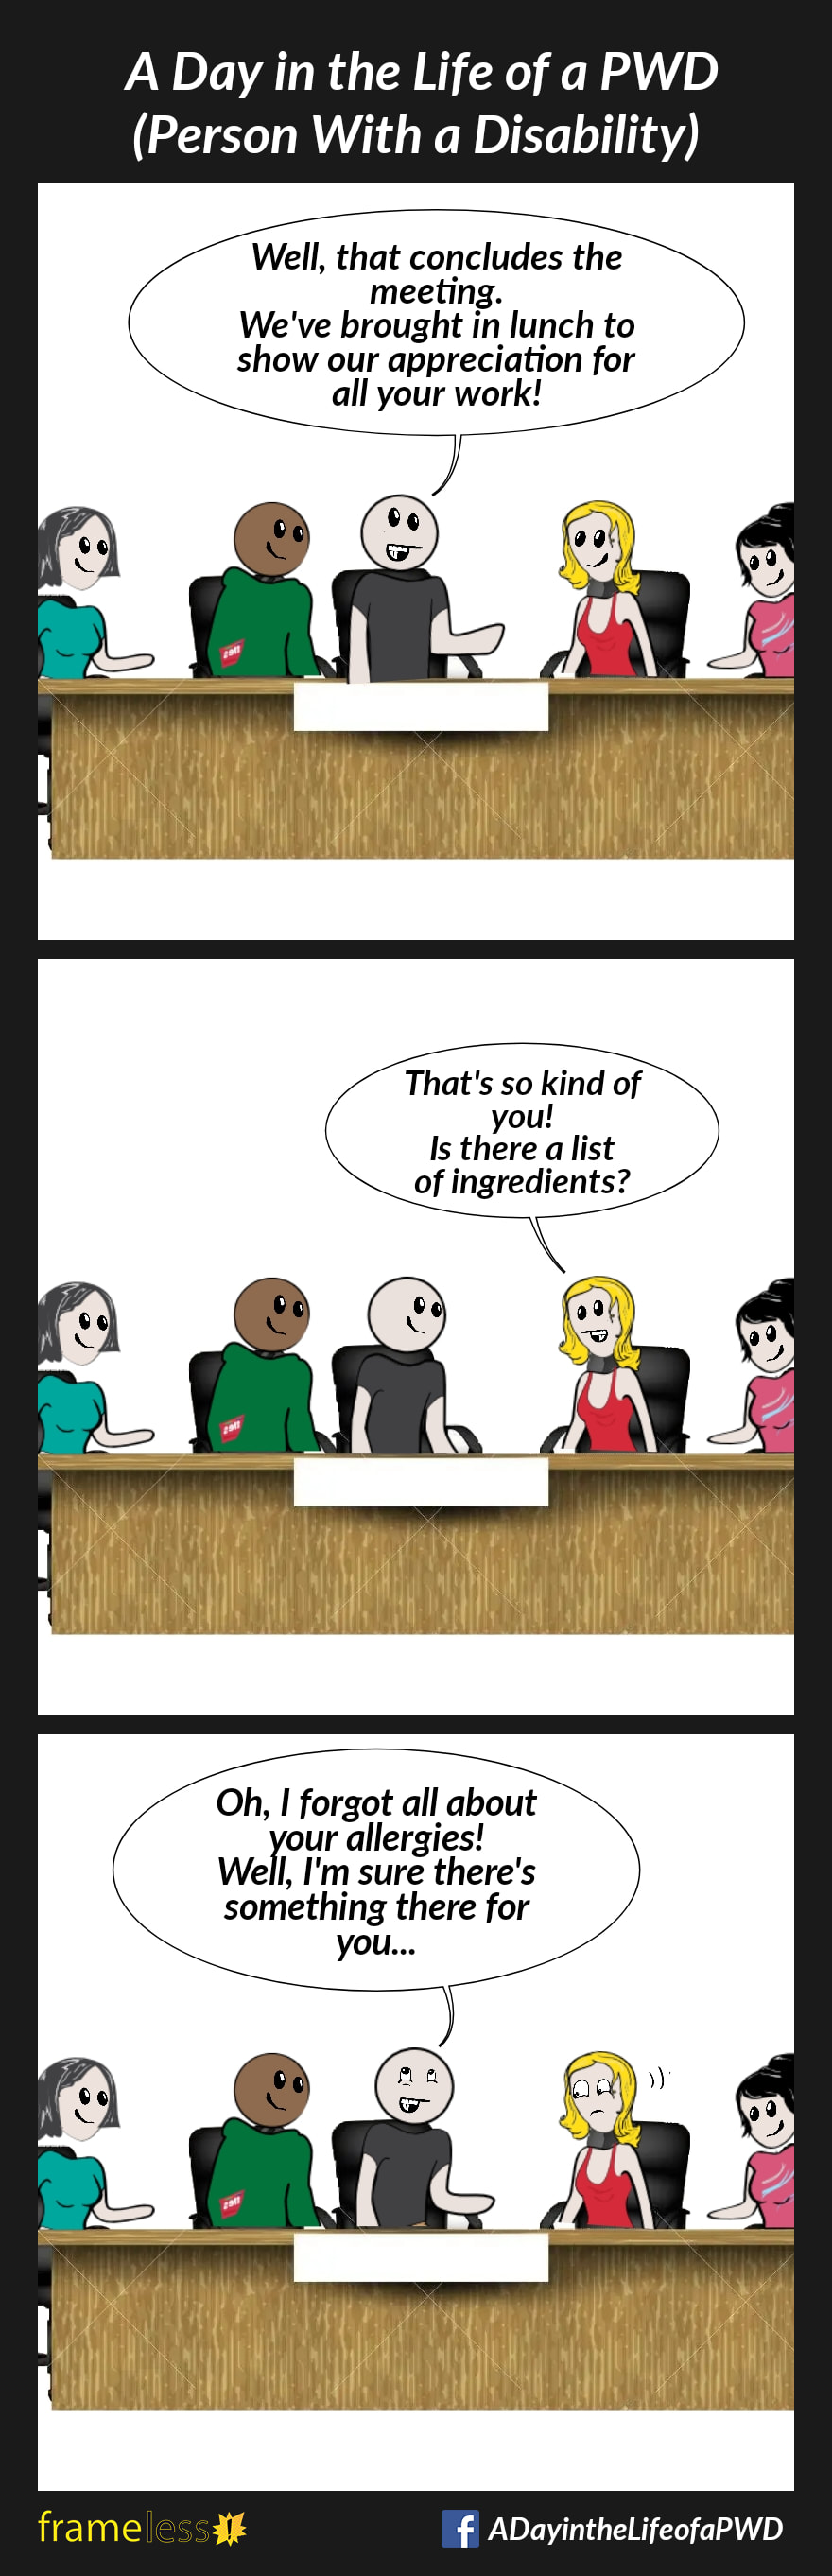 COMIC STRIP 
A Day in the Life of a PWD (Person With a Disability) 

Frame 1:
A group of employees are sitting at a conference table with their boss.
BOSS: Well, that concludes the meeting. We've brought in lunch to show appreciation for all your work!

Frame 2:
EMPLOYEE: That is so kind of you! Is there a list of ingredients?

Frame 3:
BOSS: Oh, I forgot all about your allergies! Well, I'm sure there's something there for you...